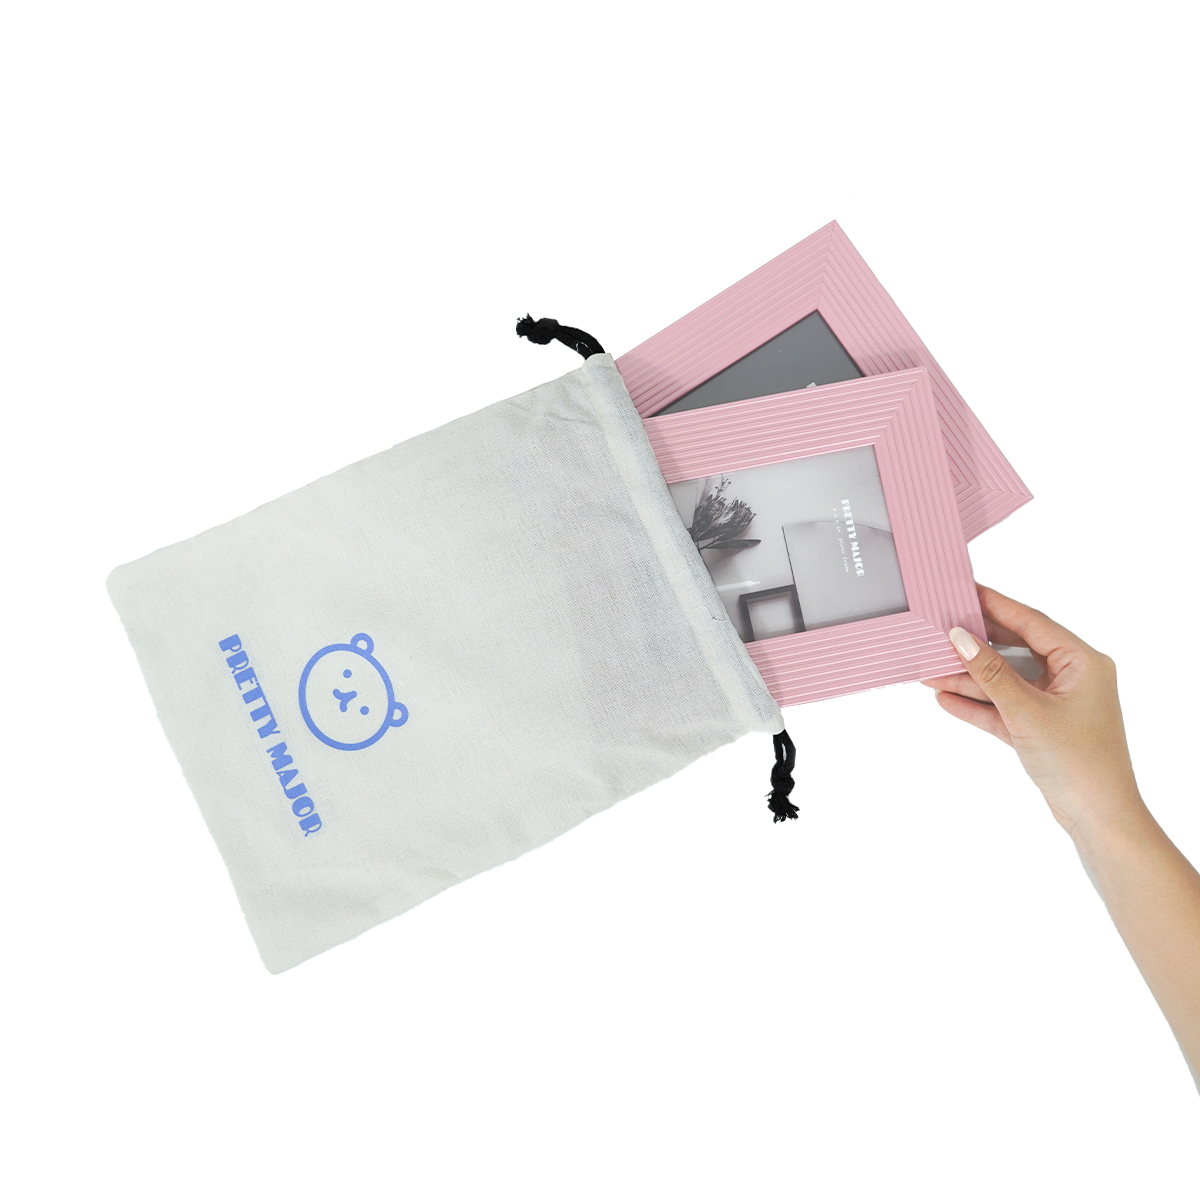 Unboxing pink photo frames for 4r and 5r photos gift set with canvas bag